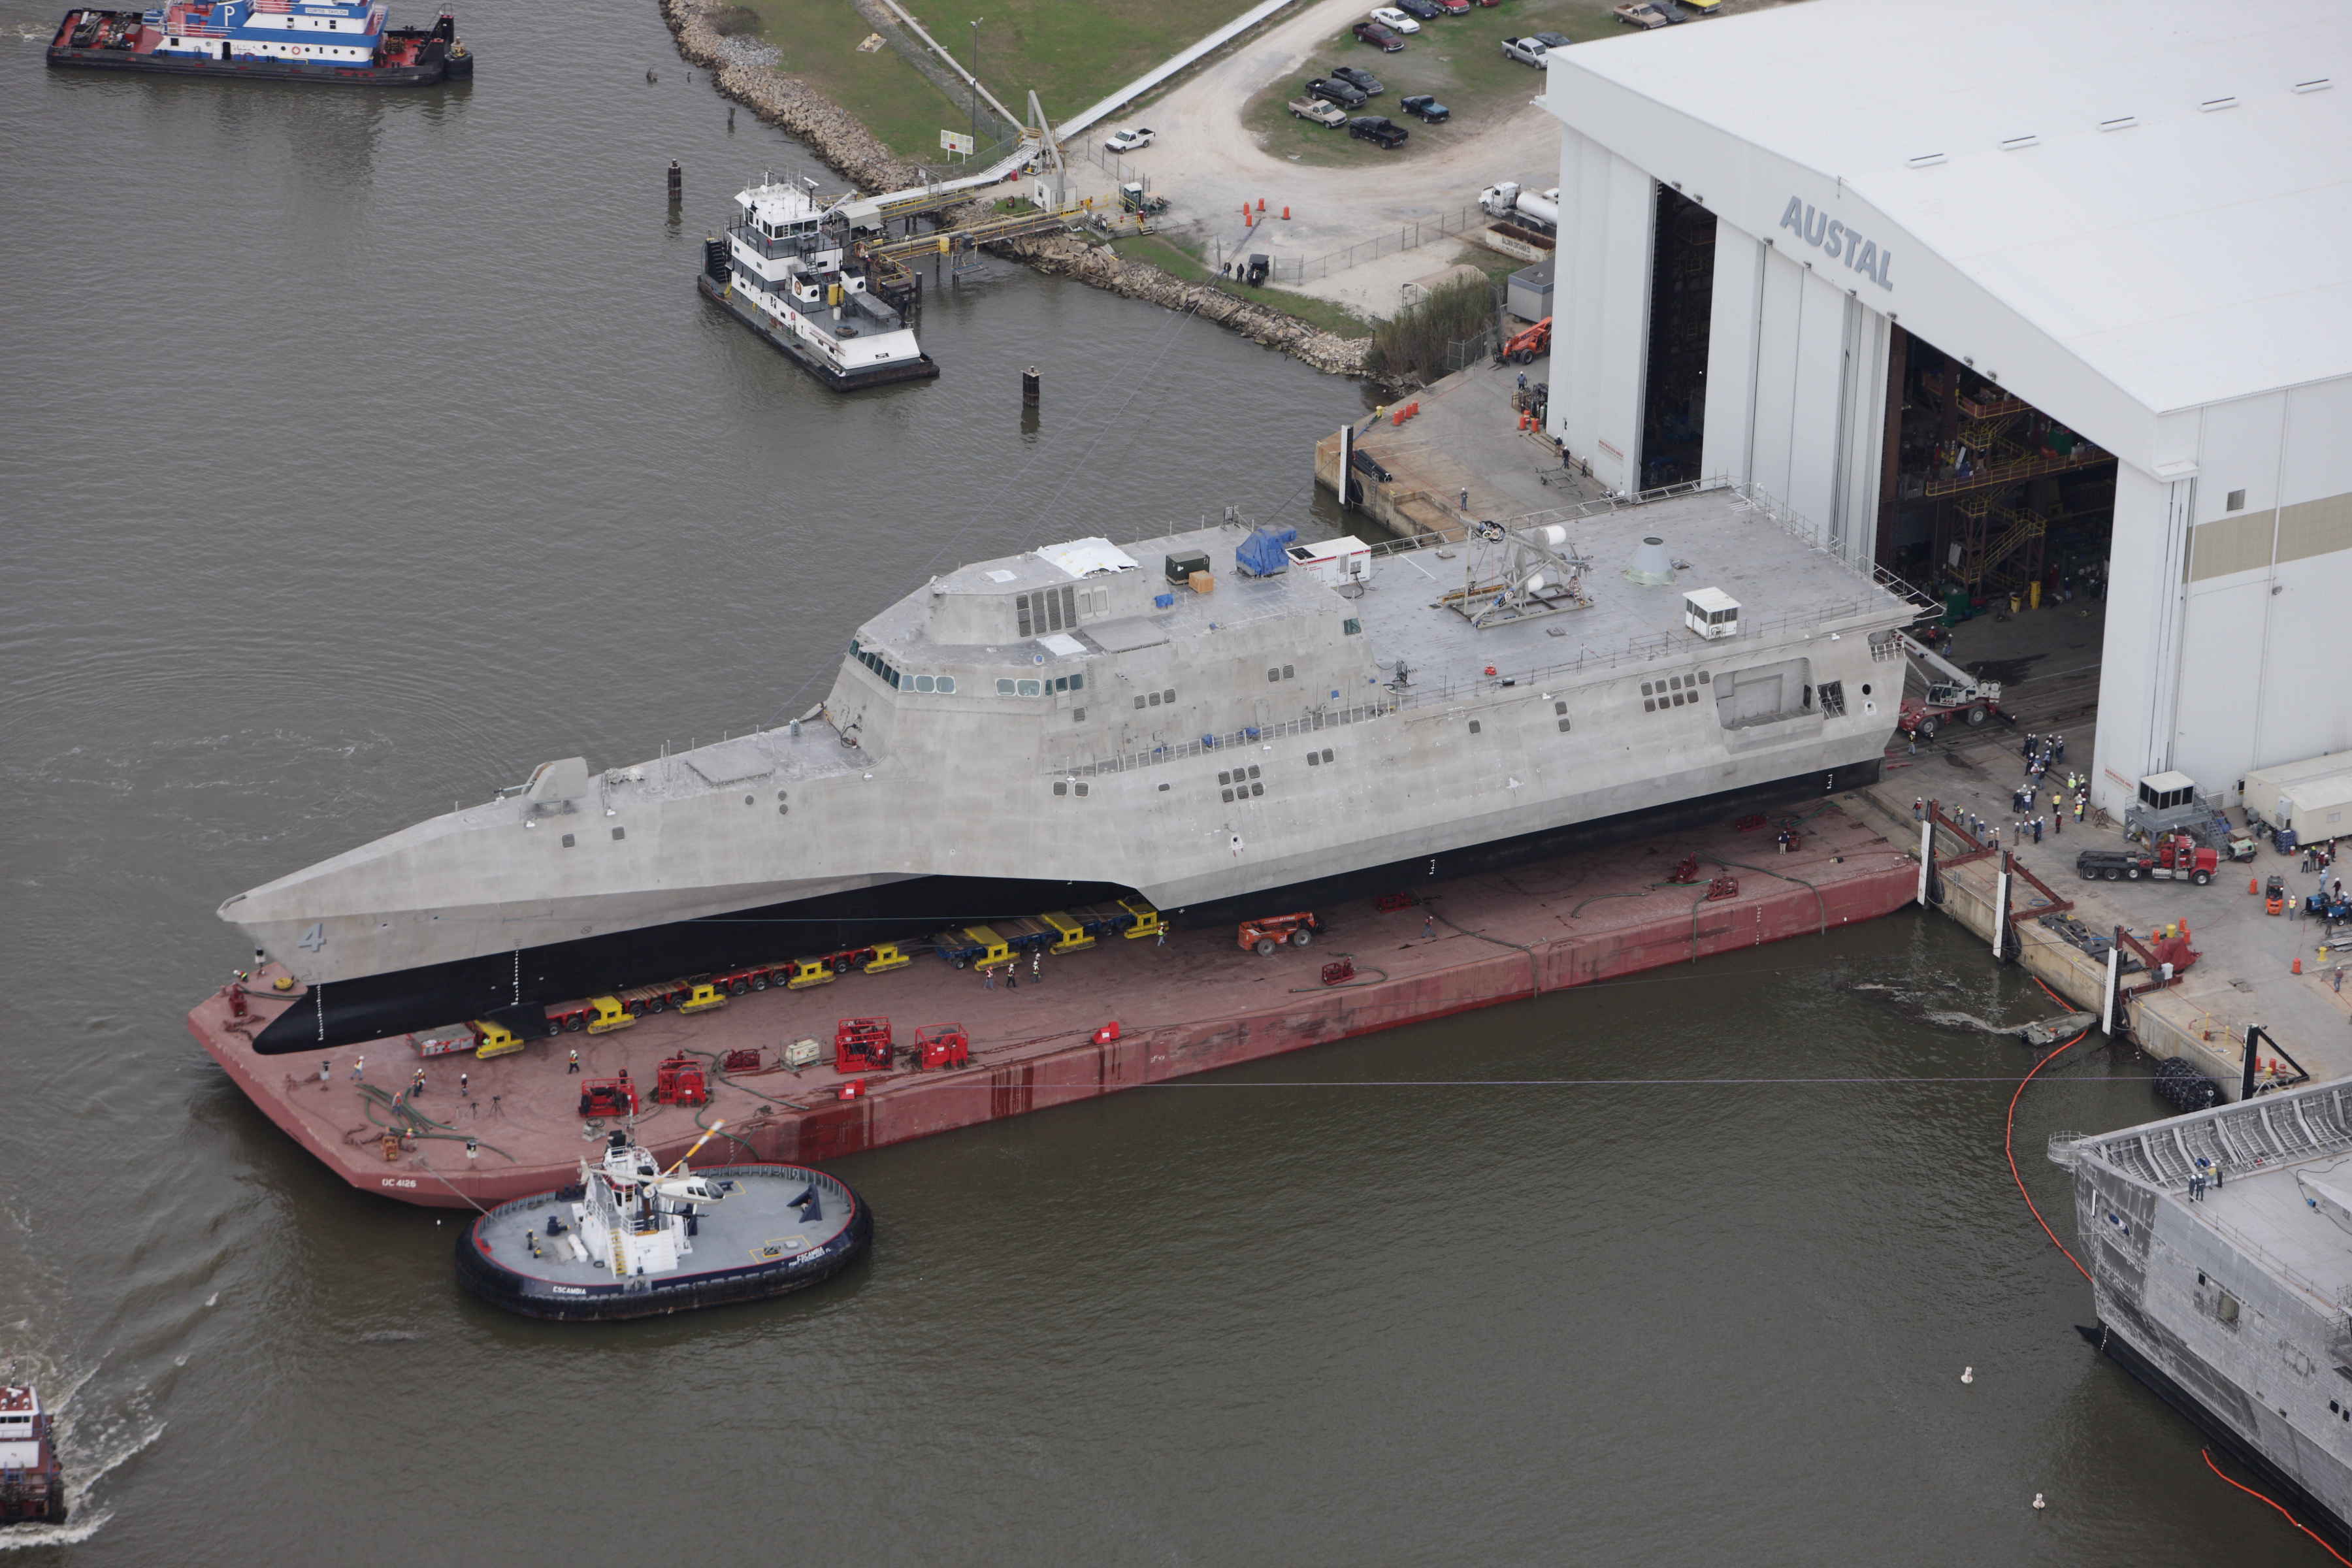 A Littoral Combat Ship, the USS Coronado (LCS-4) being rolled out of the assembly bay at Austal USA’s shipyard in Mobile, Alabama [Image: US Navy]